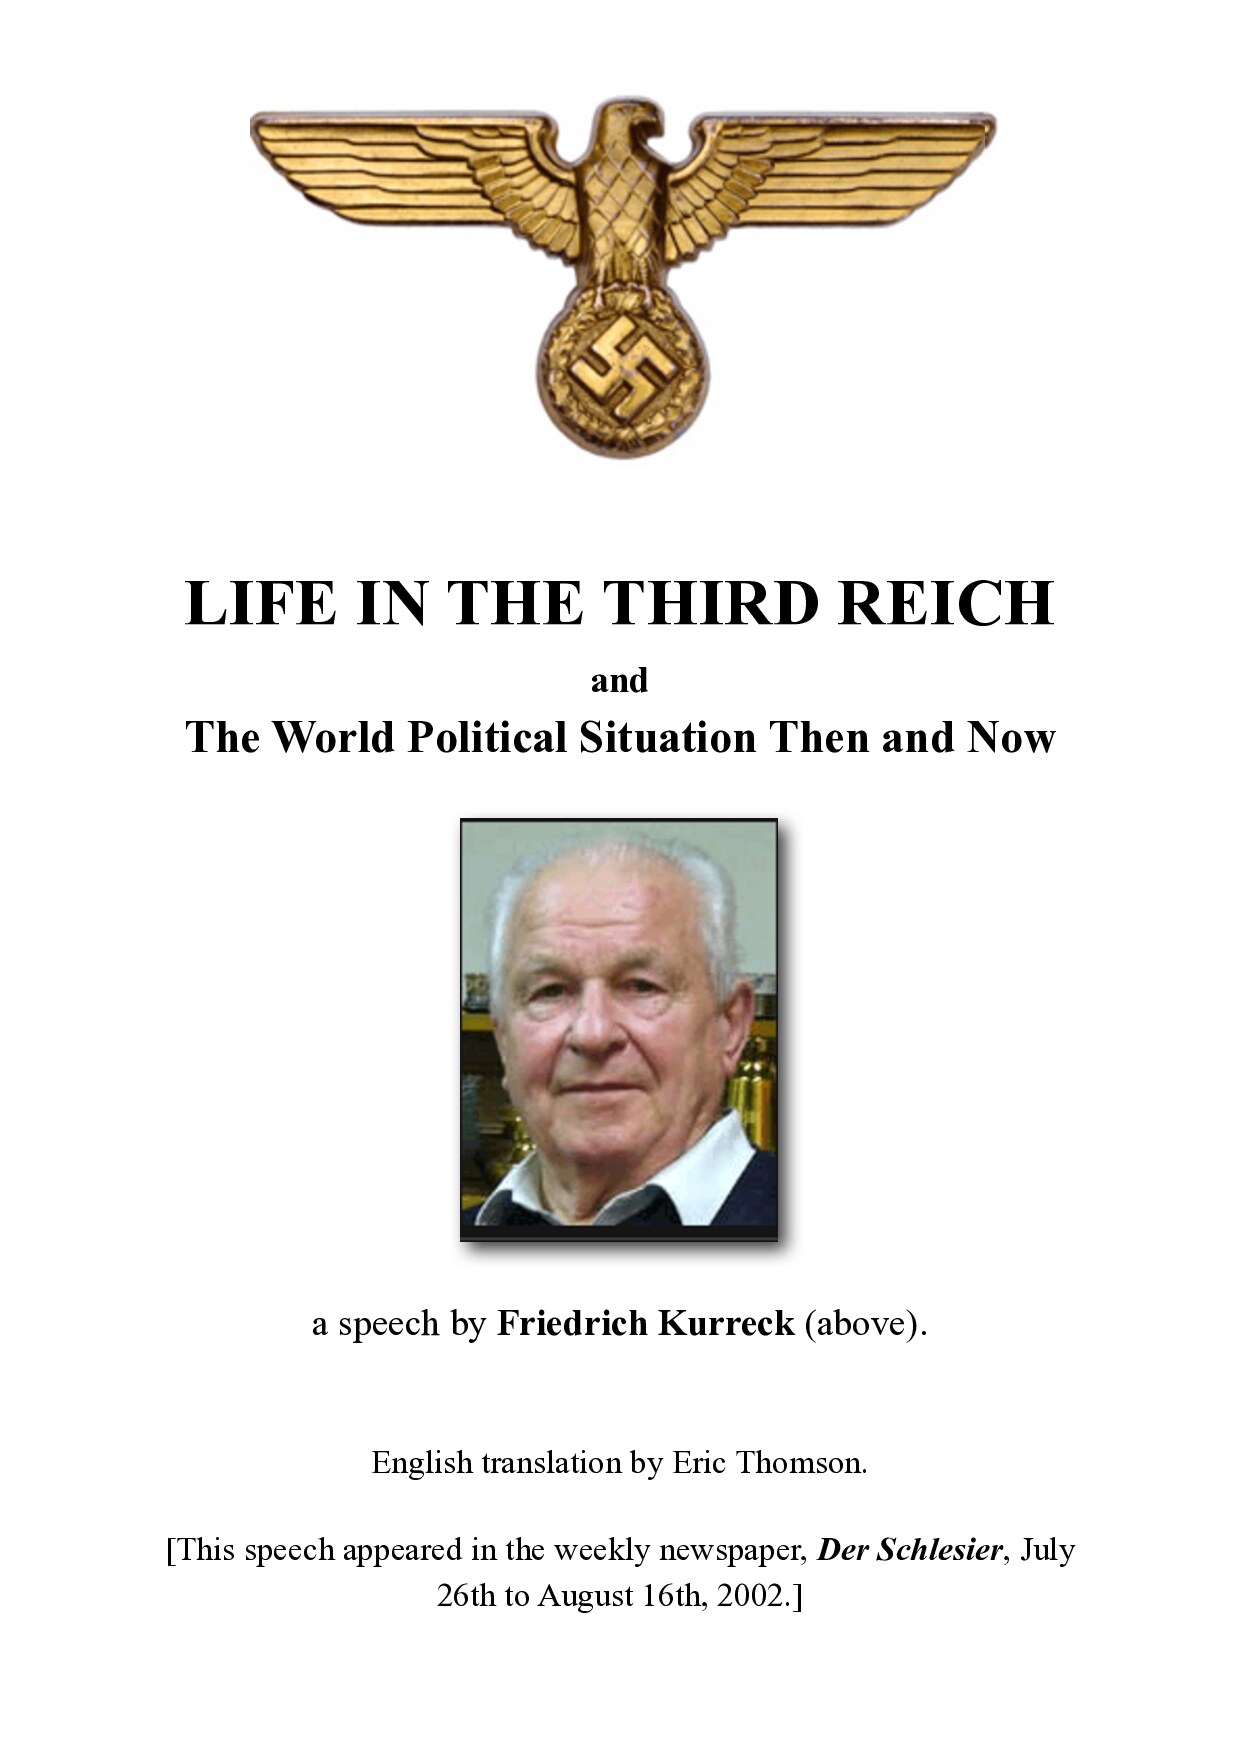 LIFE IN THE THIRD REICH Ver 2